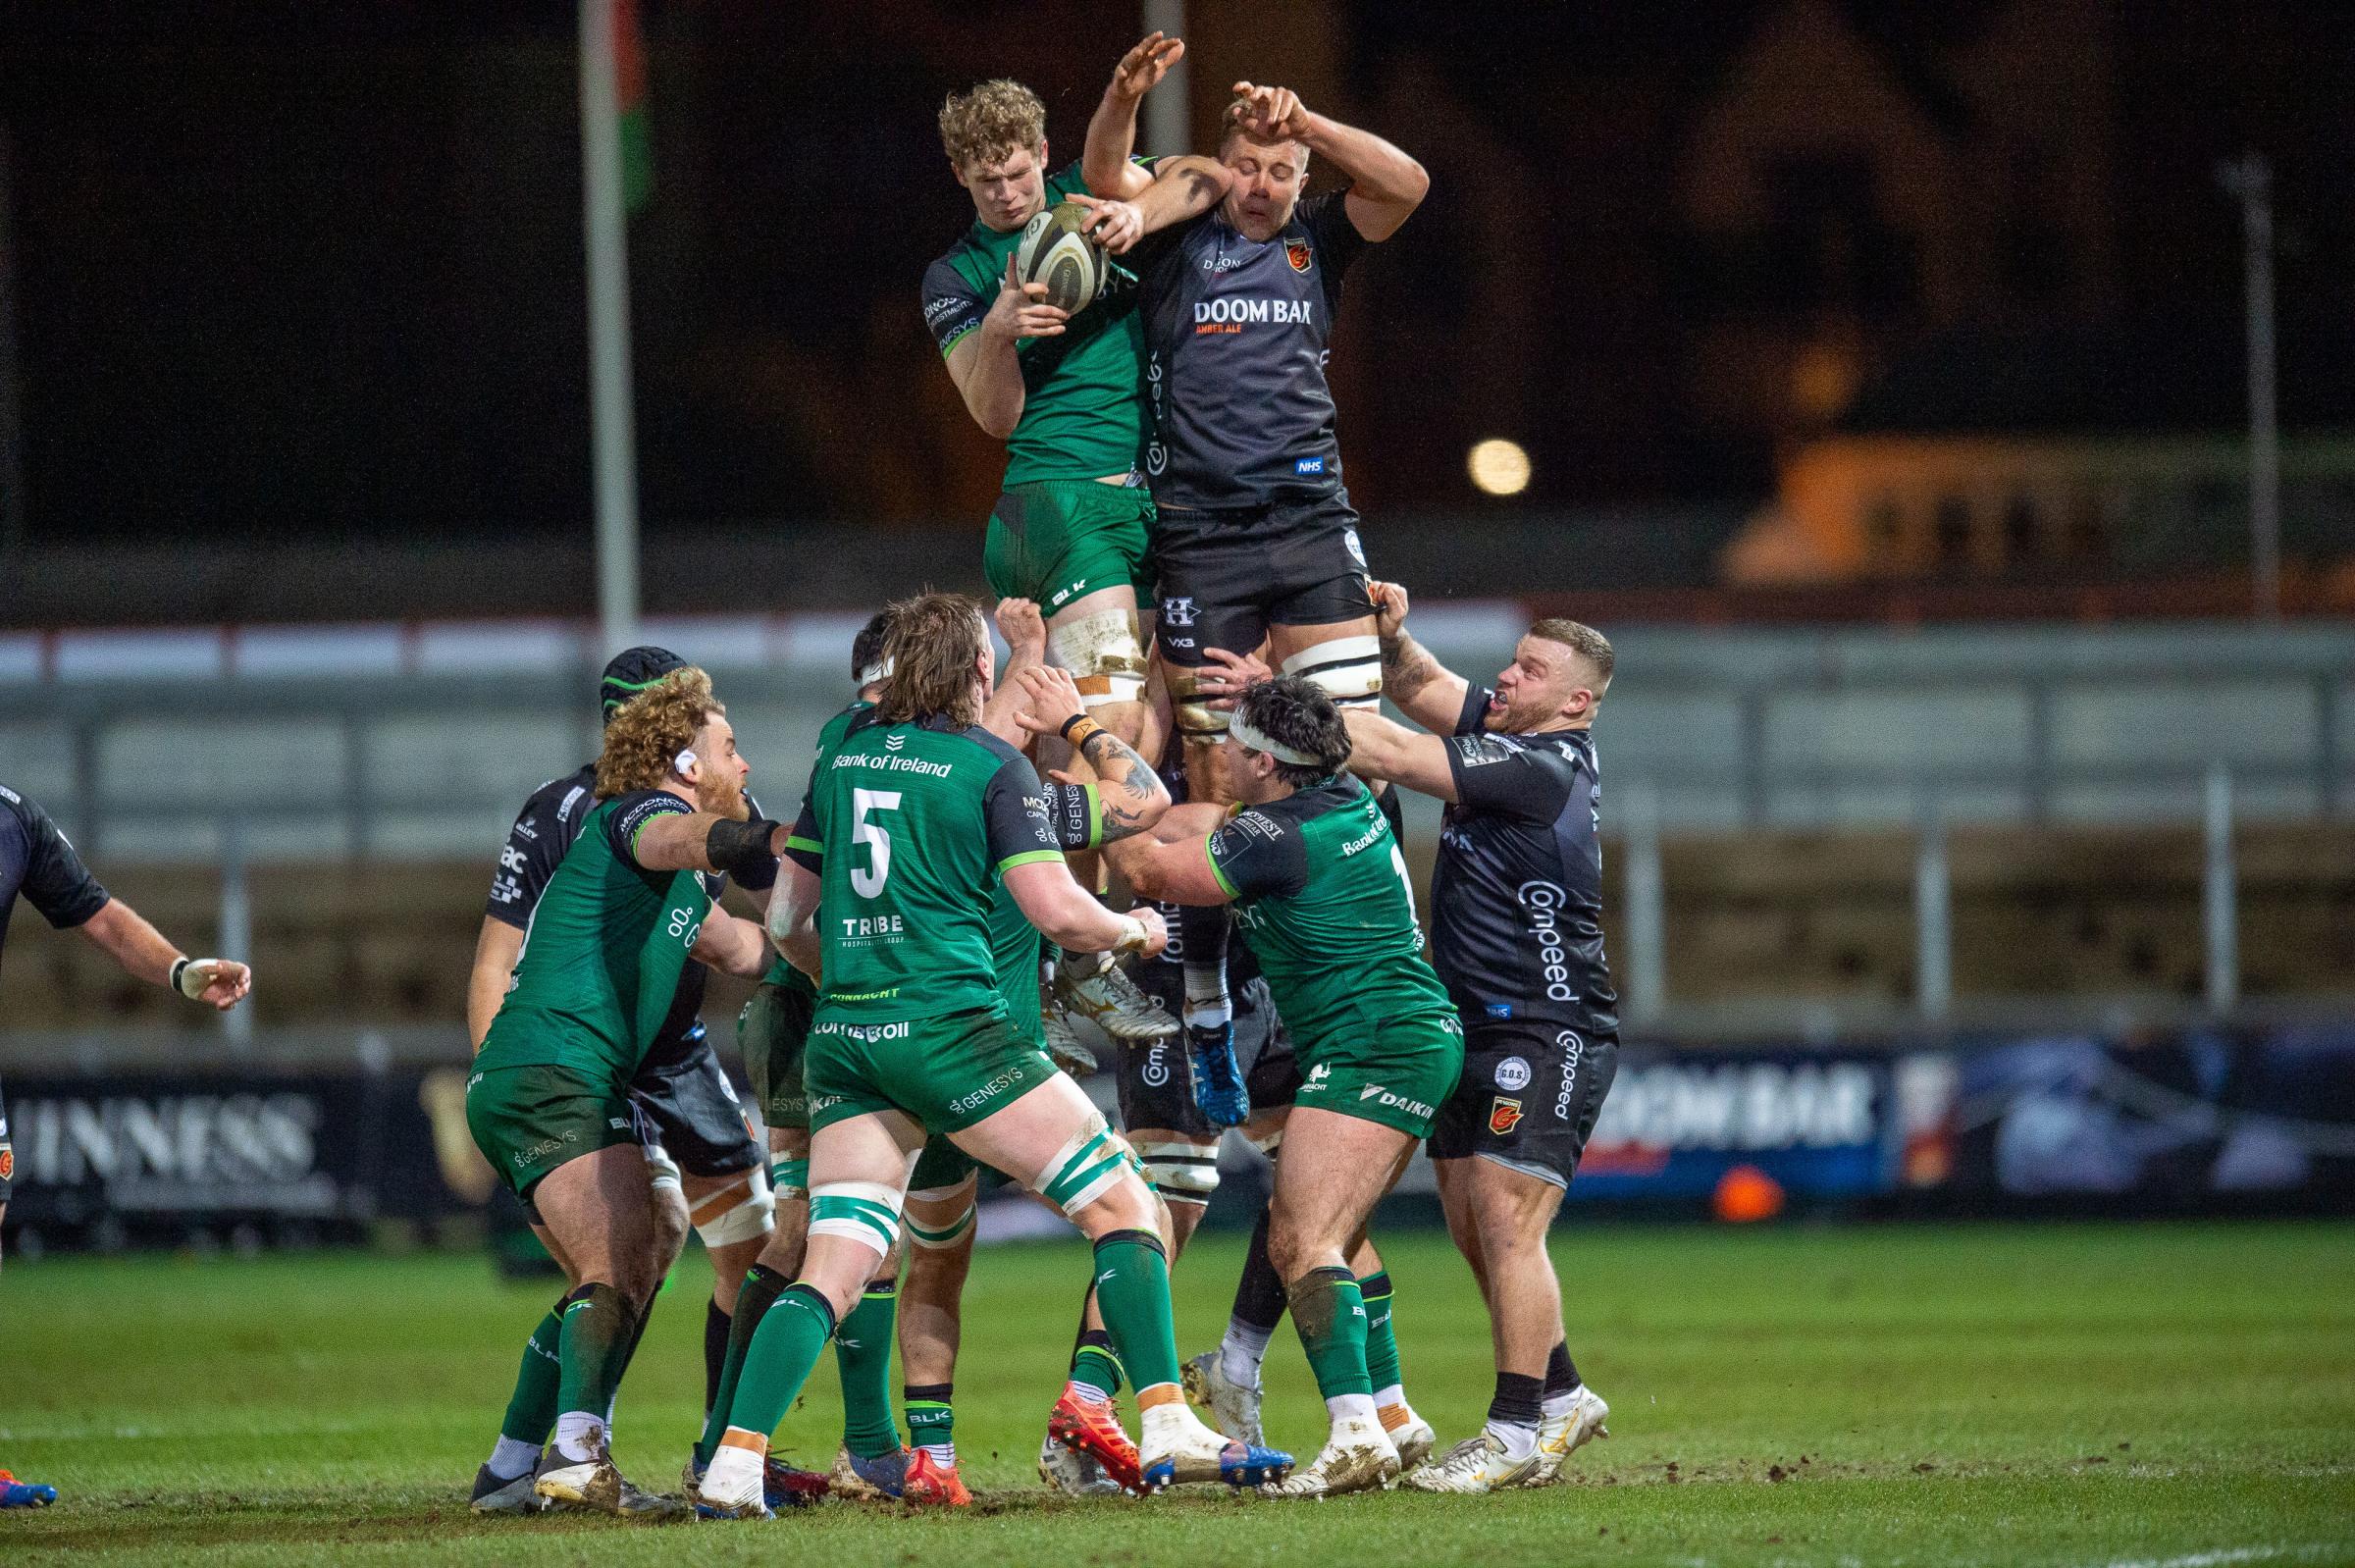 Dragons lock Ben Carter tries to disrupt the Connacht lineout